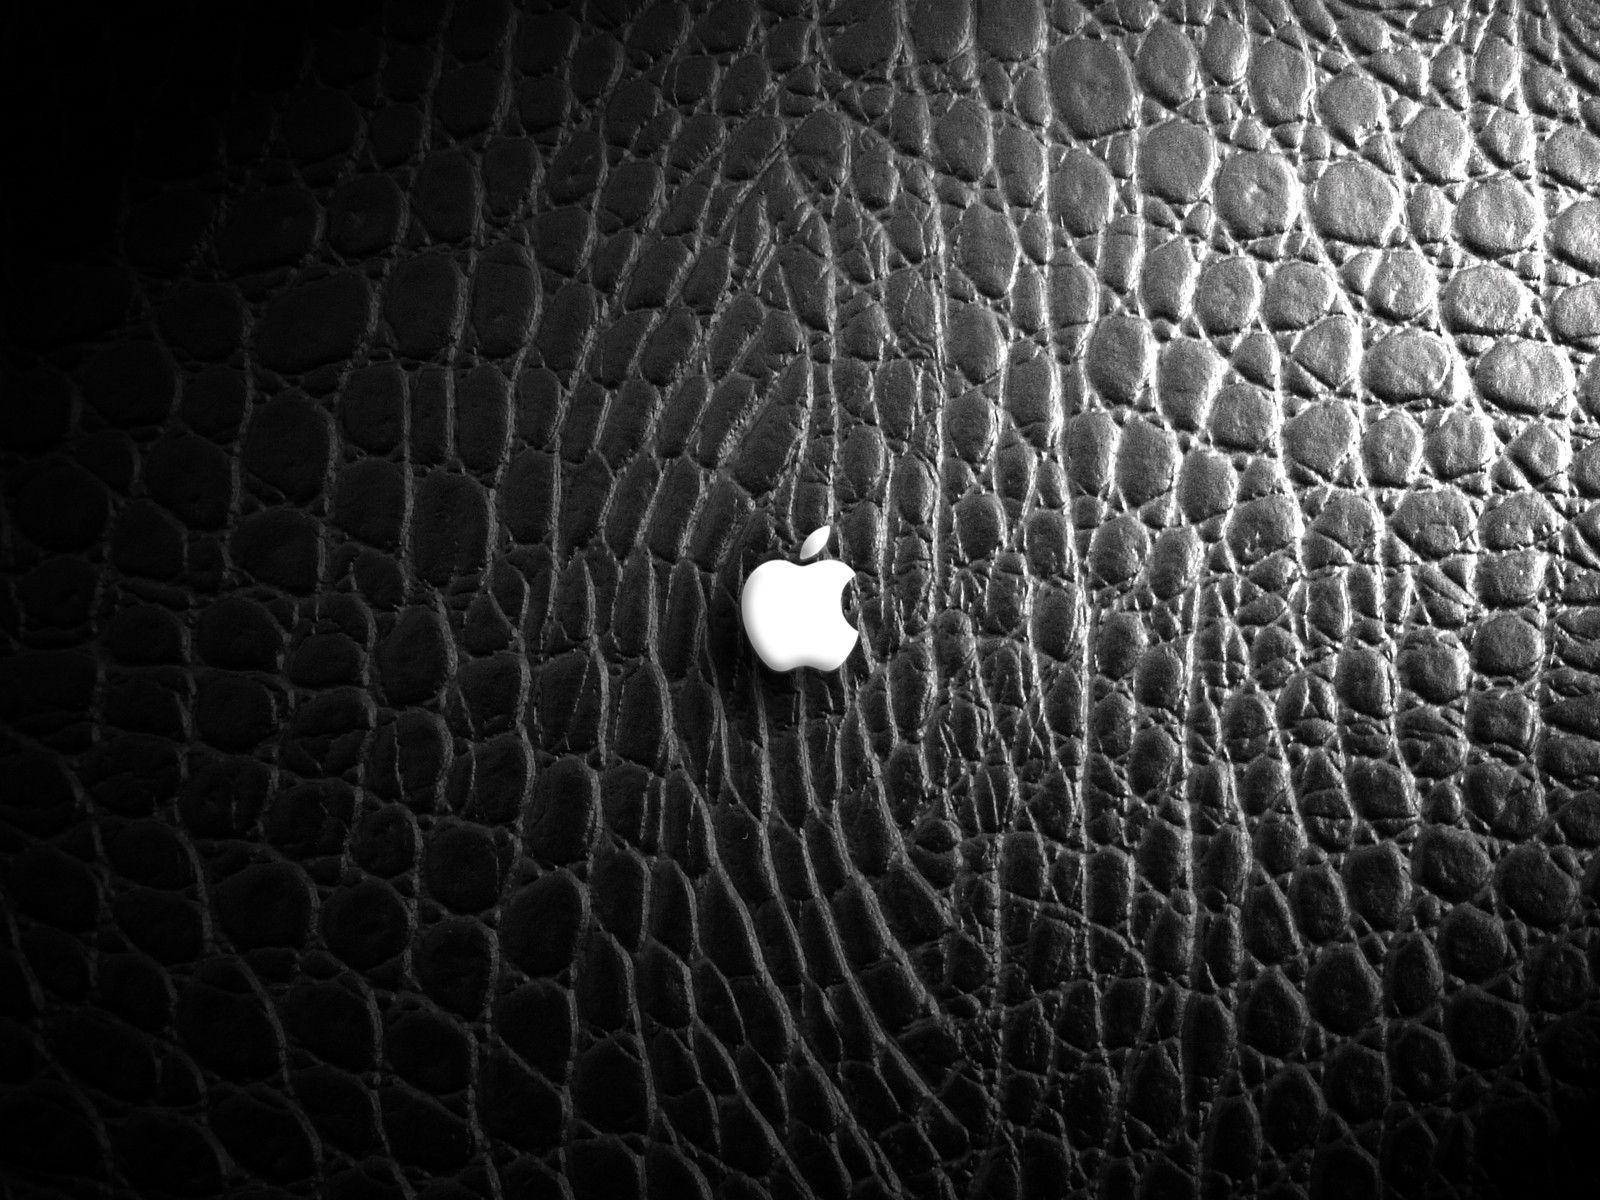 Black Leather IPhone Wallpaper  IPhone Wallpapers  iPhone Wallpapers